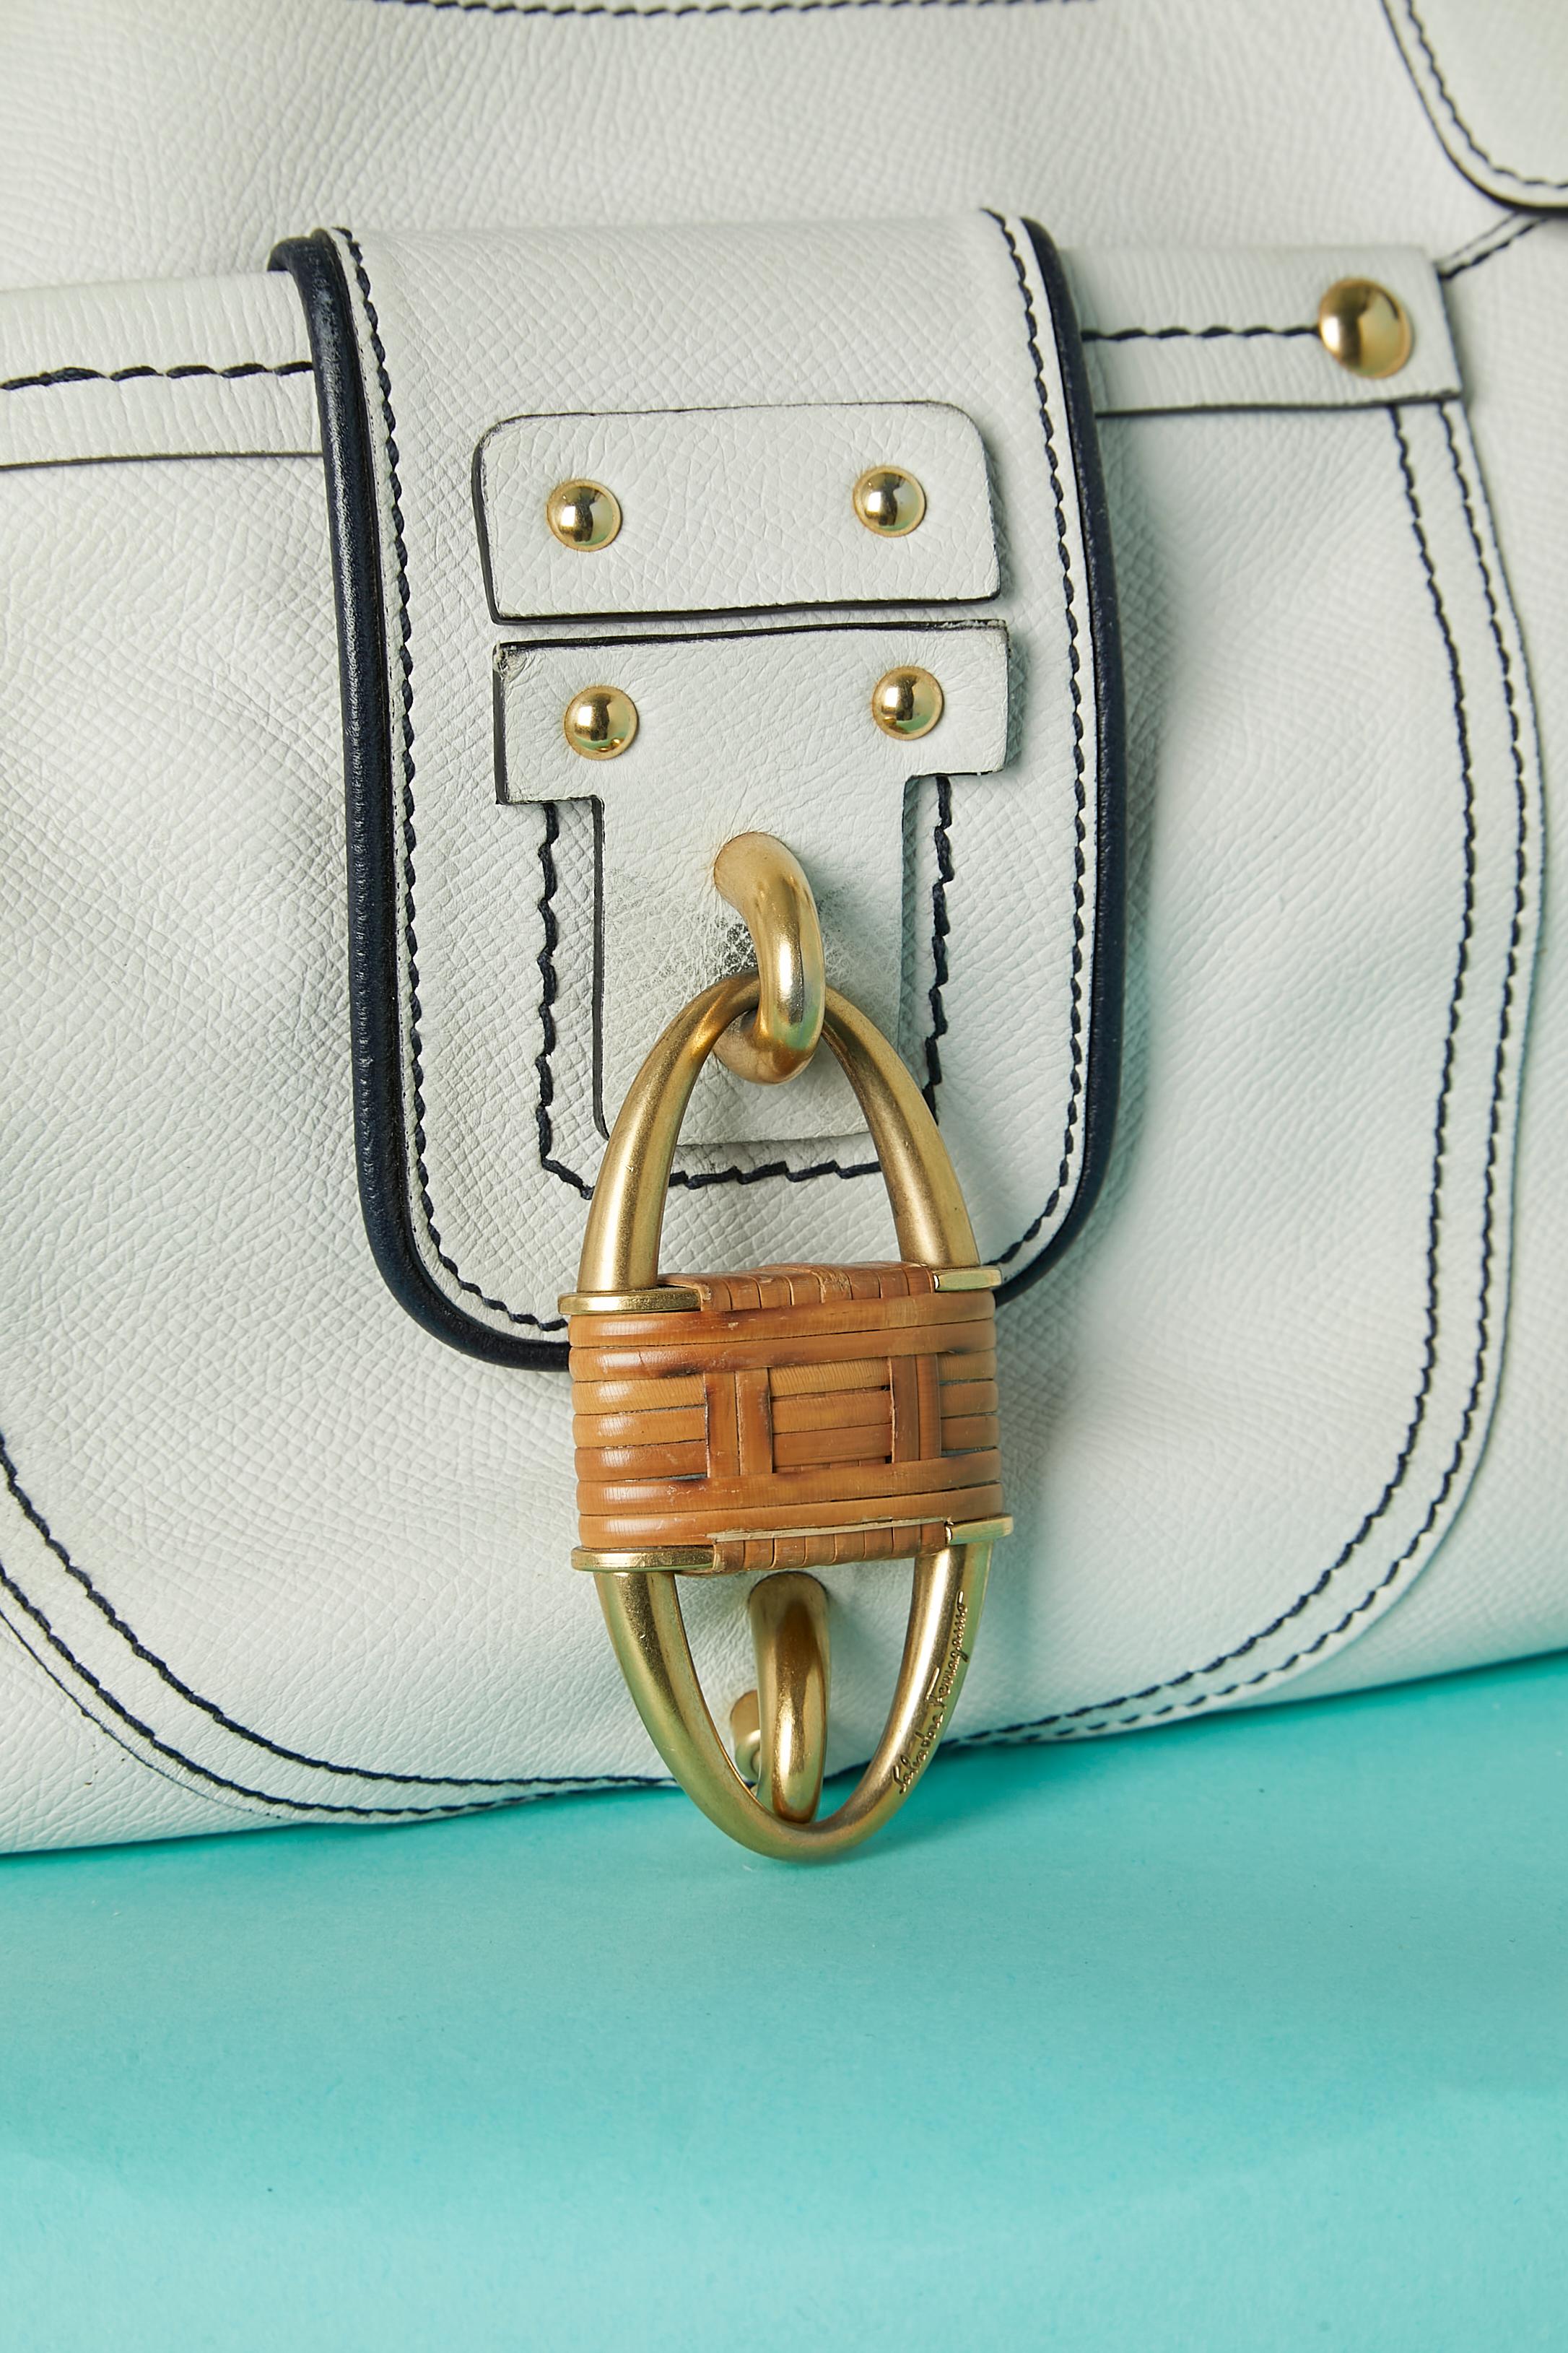 White leather top handle bag with branded nylon lining. One front pocket with silver metal locker covered with rattan. 
One large pocket inside with zip closure and 2 small flat pockets. Gold studs on the front and underneath the bag. 
Numbered: